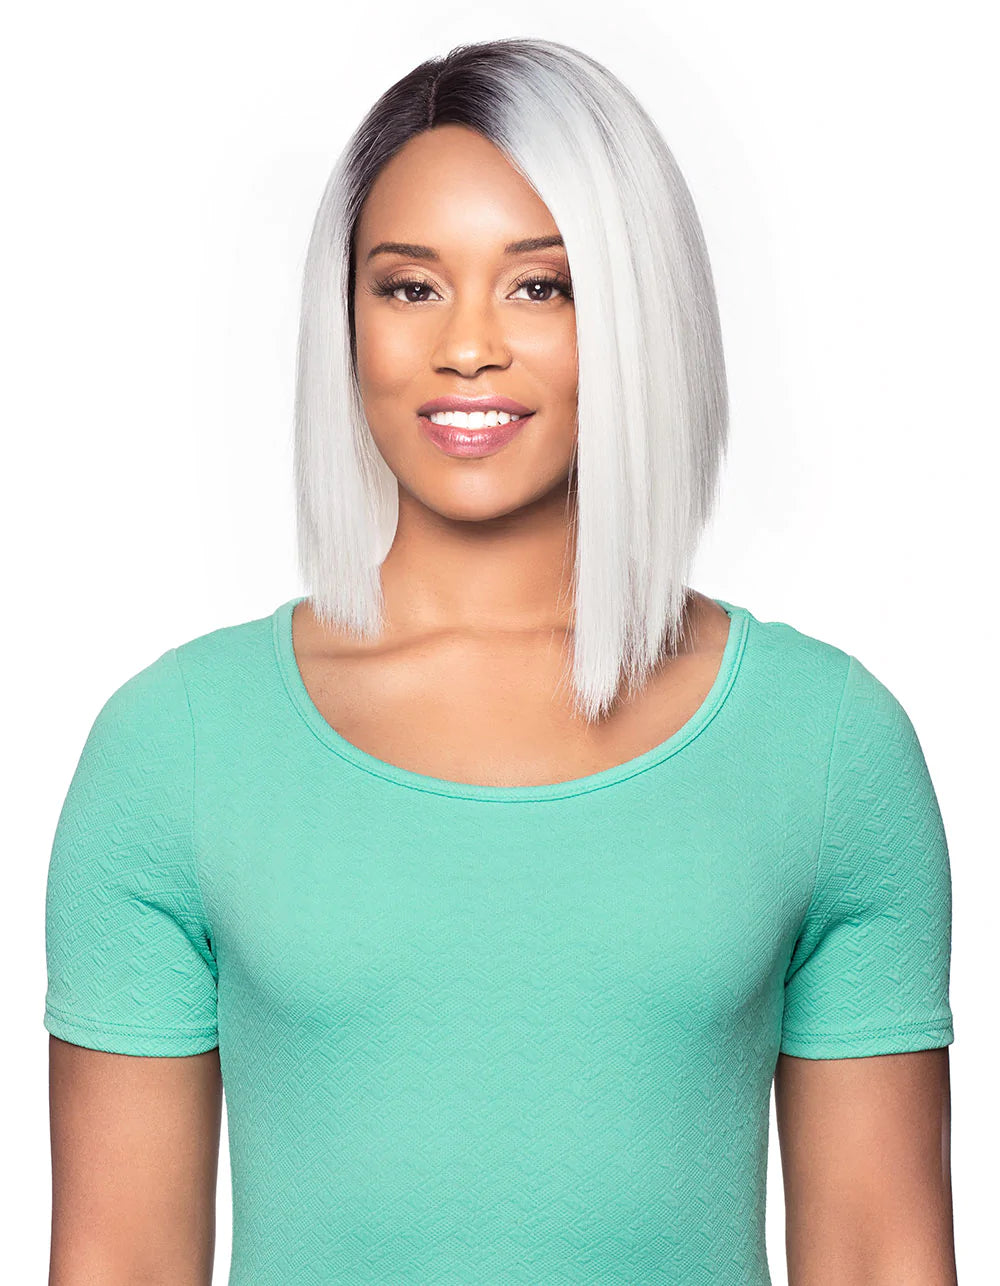 Alicia FOXY LADY CLEARY J LACE WIG SY - 10852